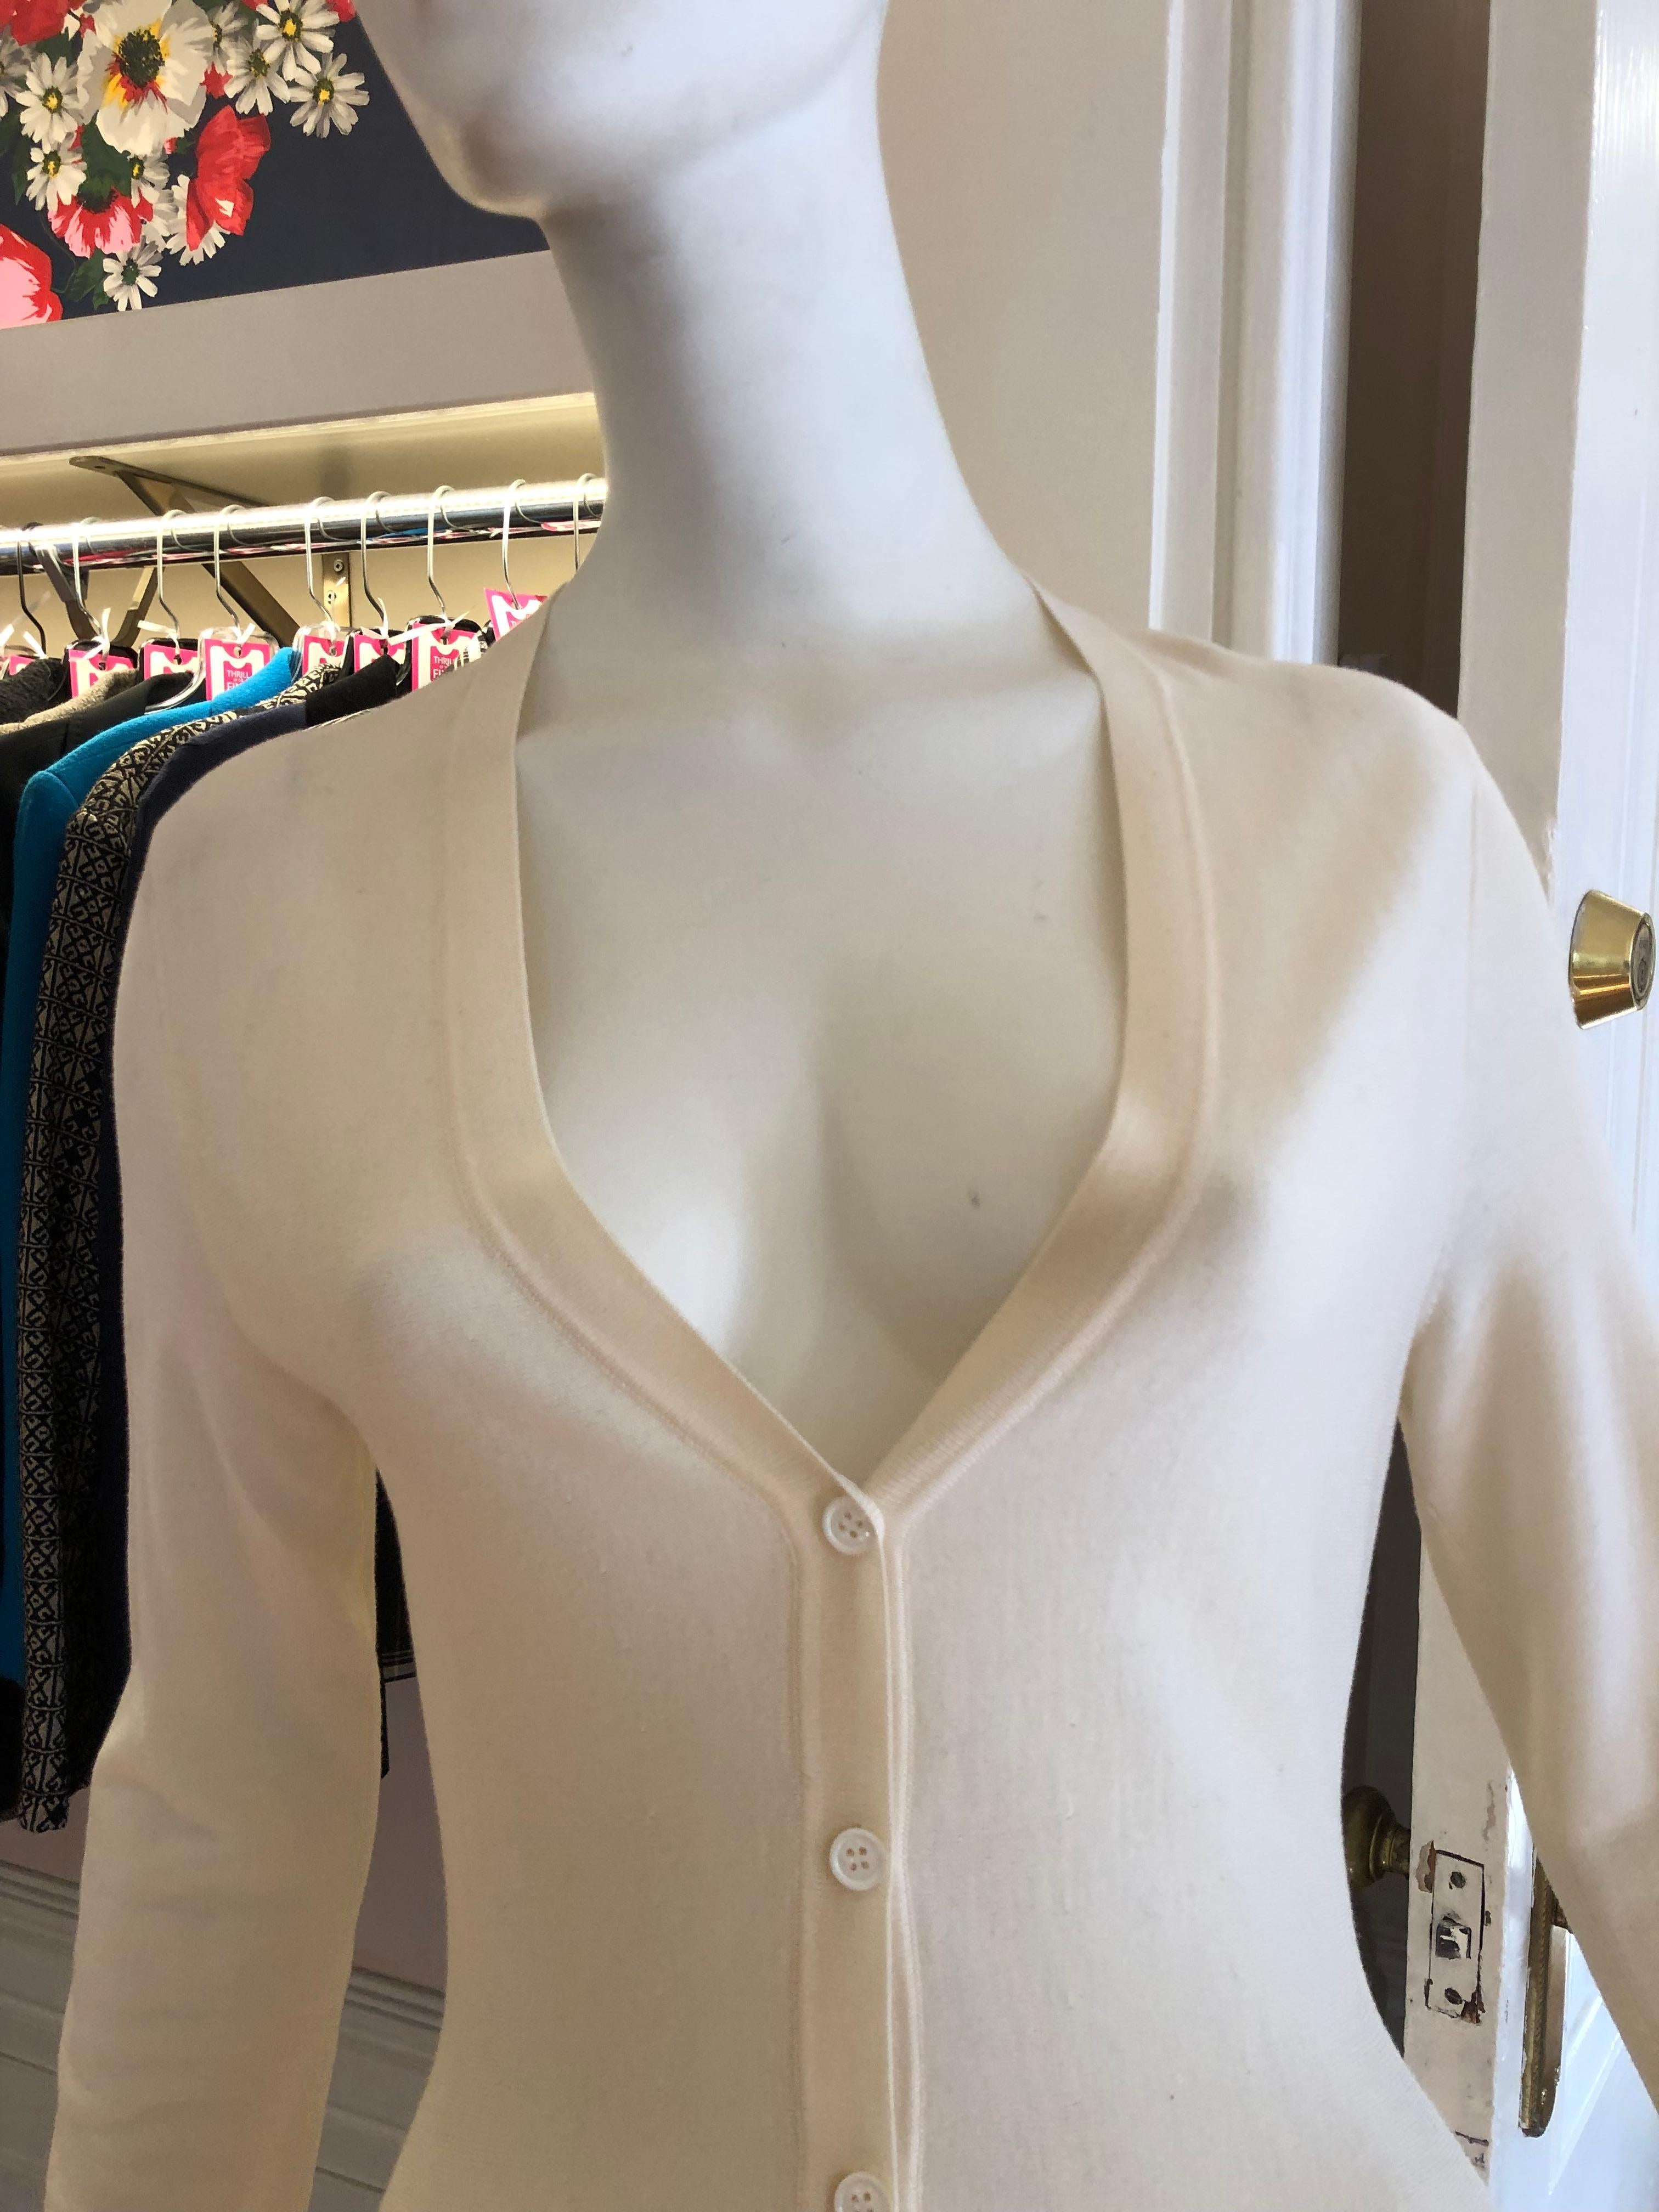 Wonderful and light weight Alexander McQueen by Sarah Burton peplum cardigan with a V-neck and button front fastening. Very flattering style.
This cardigan is in excellent condition with a very tiny hole at the back neckline (see picture).
There is